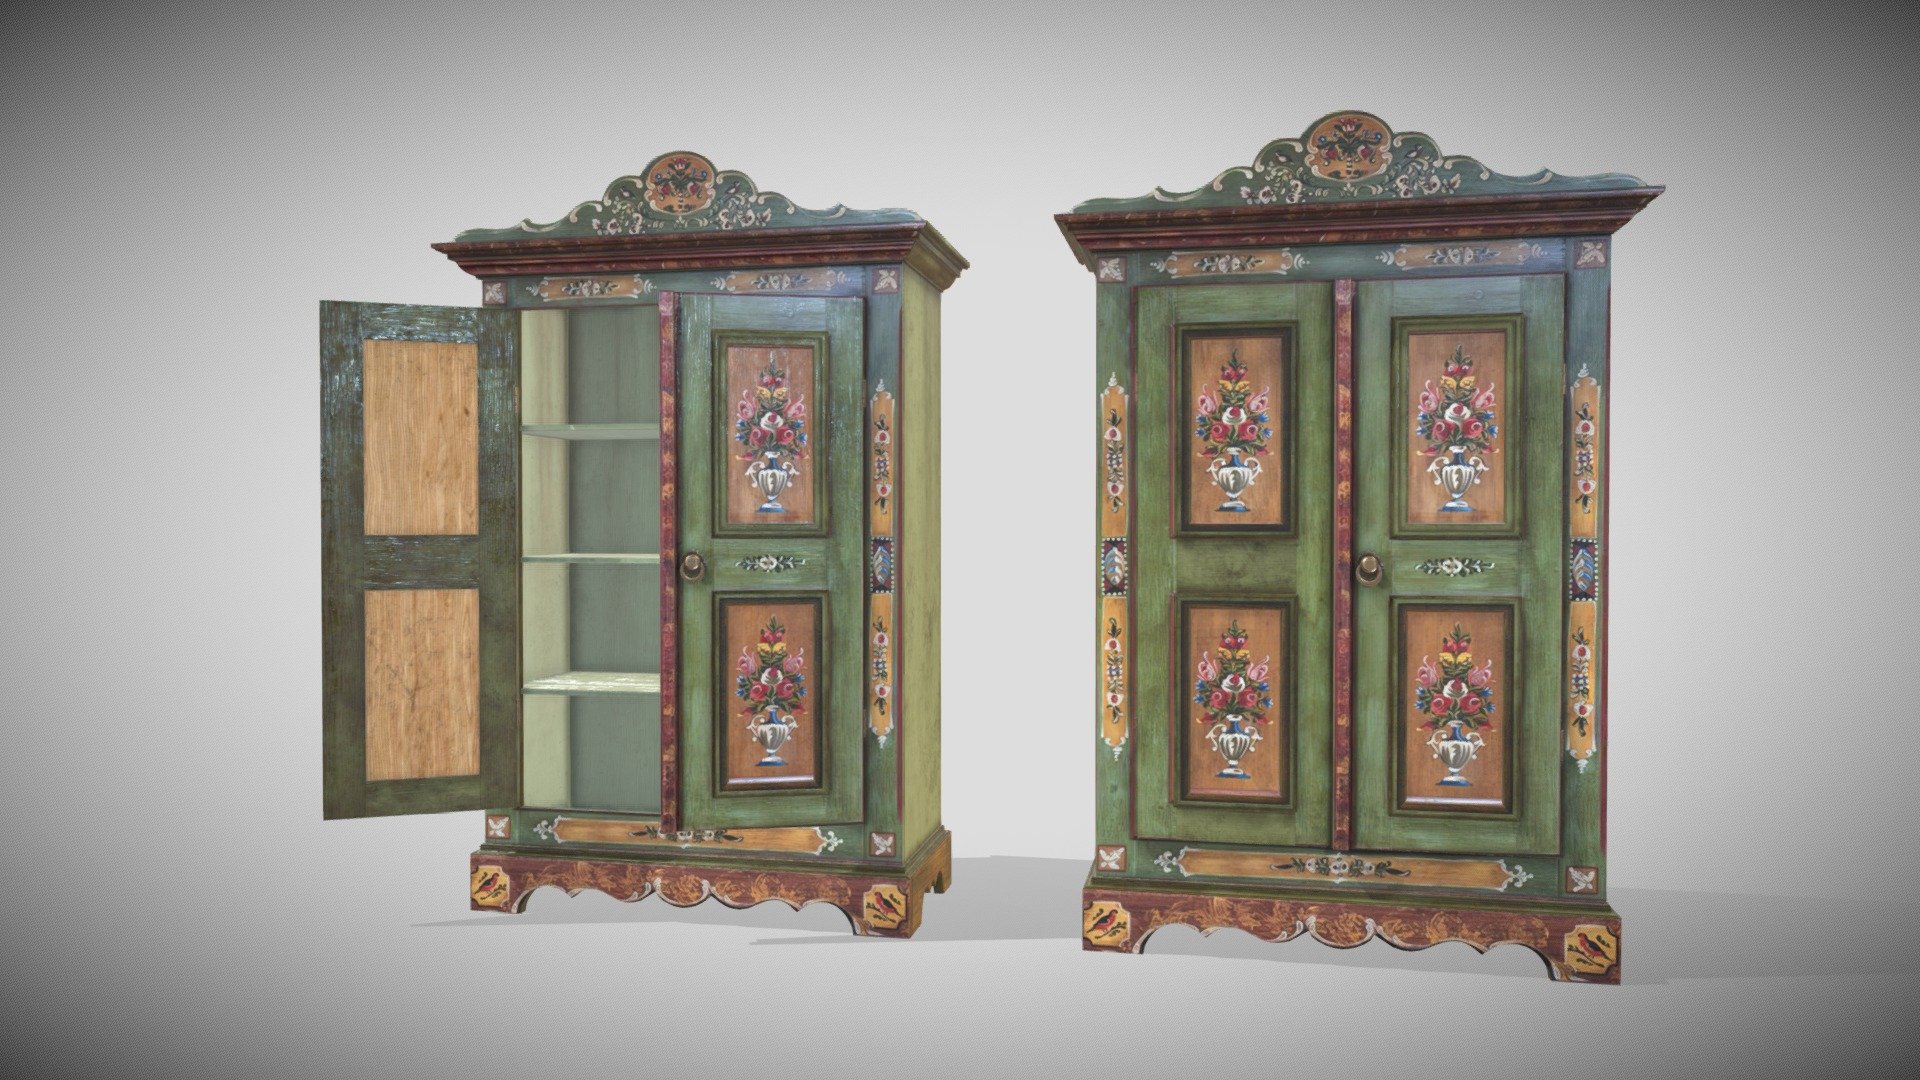 One Material PBR Metalness 4k (.png)

Quads

Indipendent Doors and Ambient Occlusion

Can be subdivided... 3d model